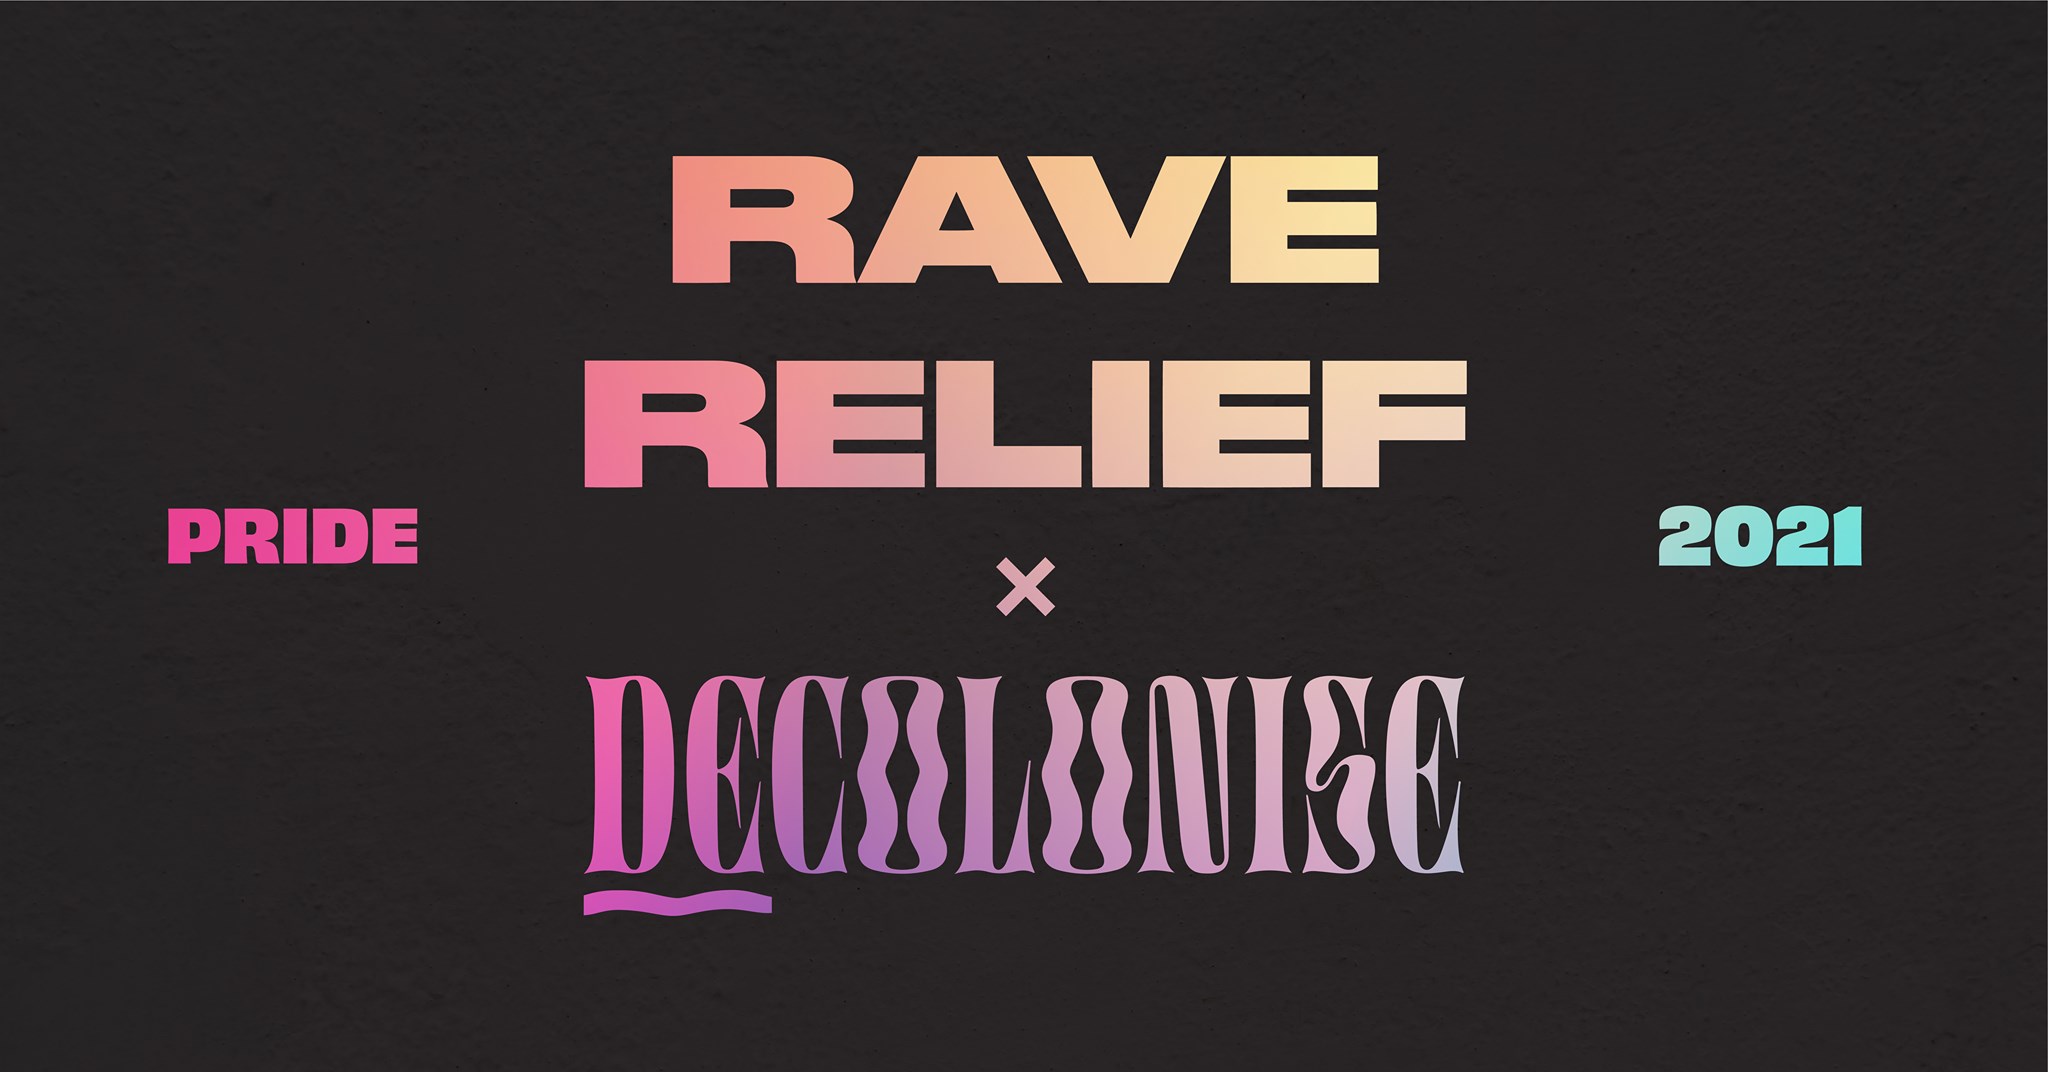 Promotional banner with text 'Rave Relief x Decolonise' and 'Pride 2021'